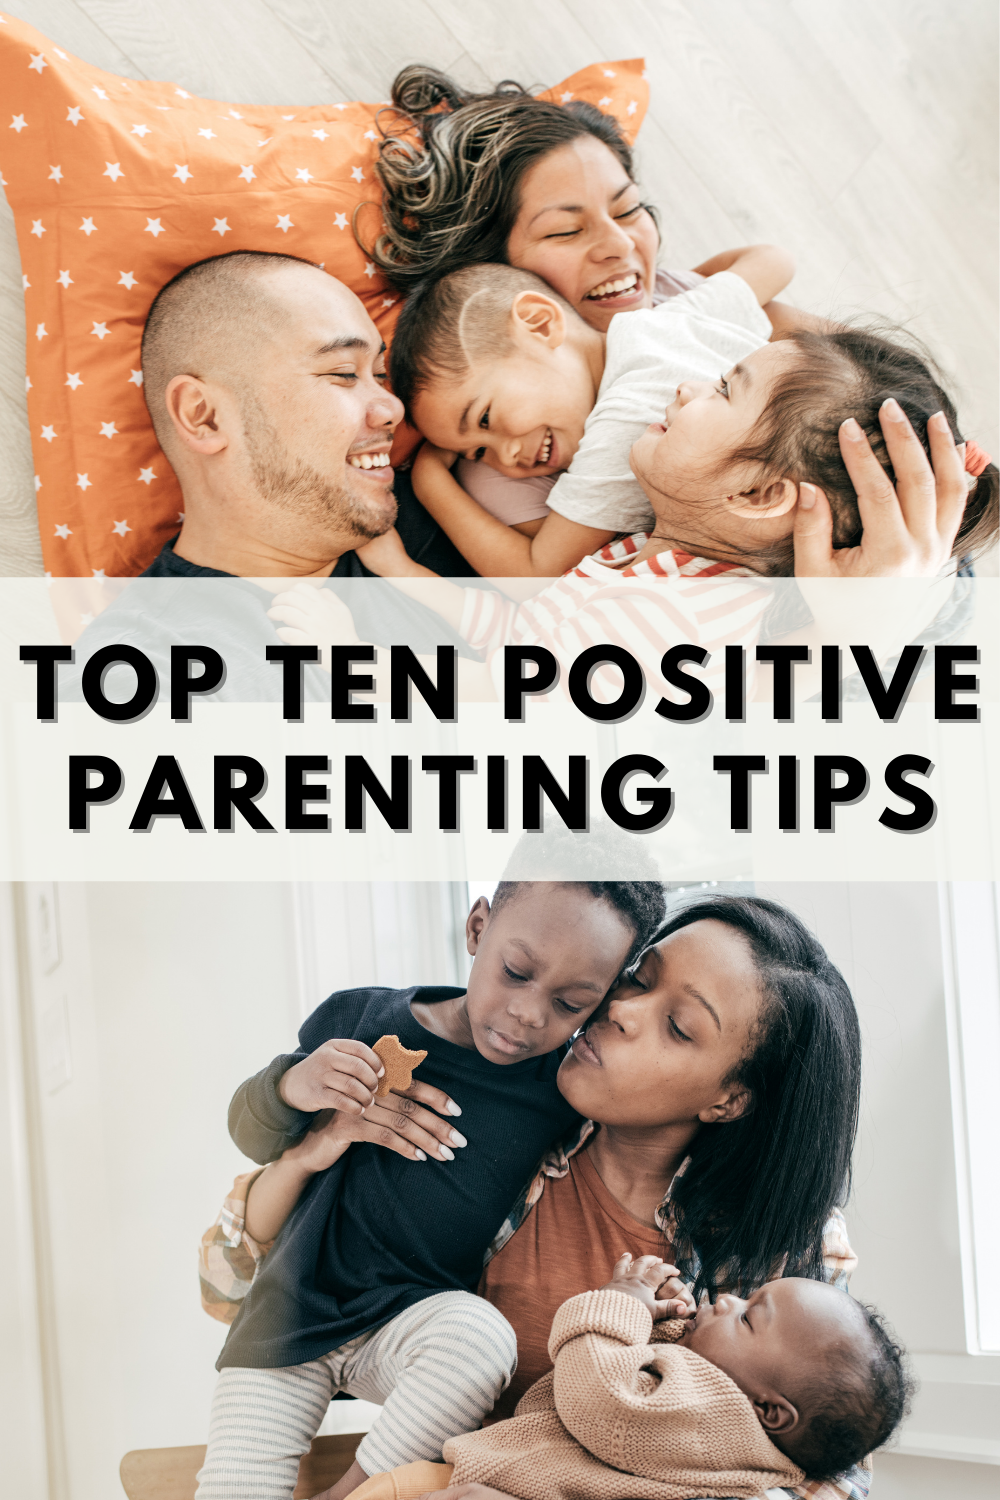 Top Ten Positive Parenting Tips for Toddlers